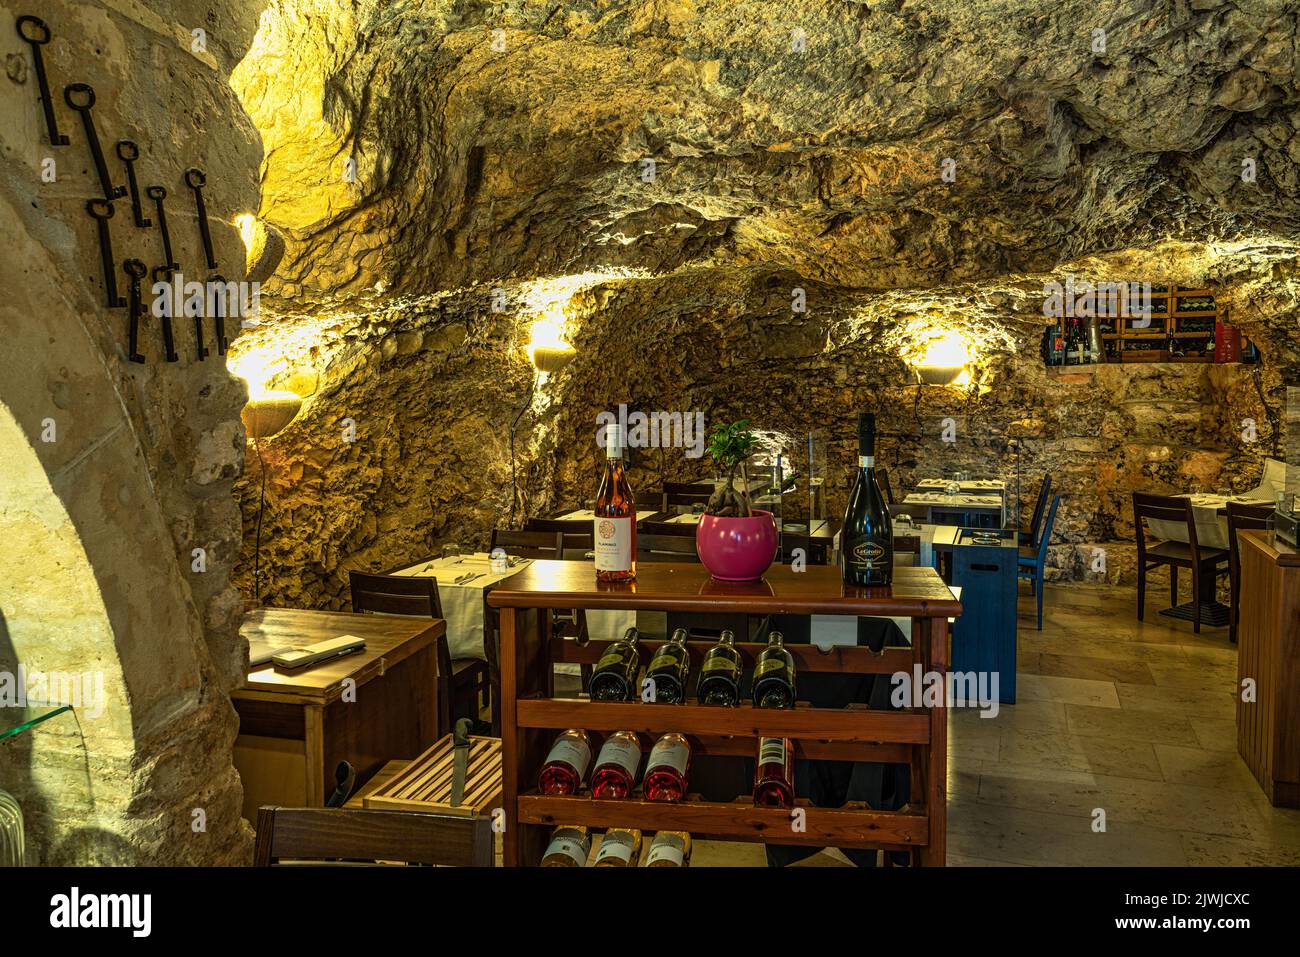 Characteristic restaurant and winery excavated in a cave in the city of Vieste. Vieste, Foggia province, Puglia, Italy, Europe Stock Photo